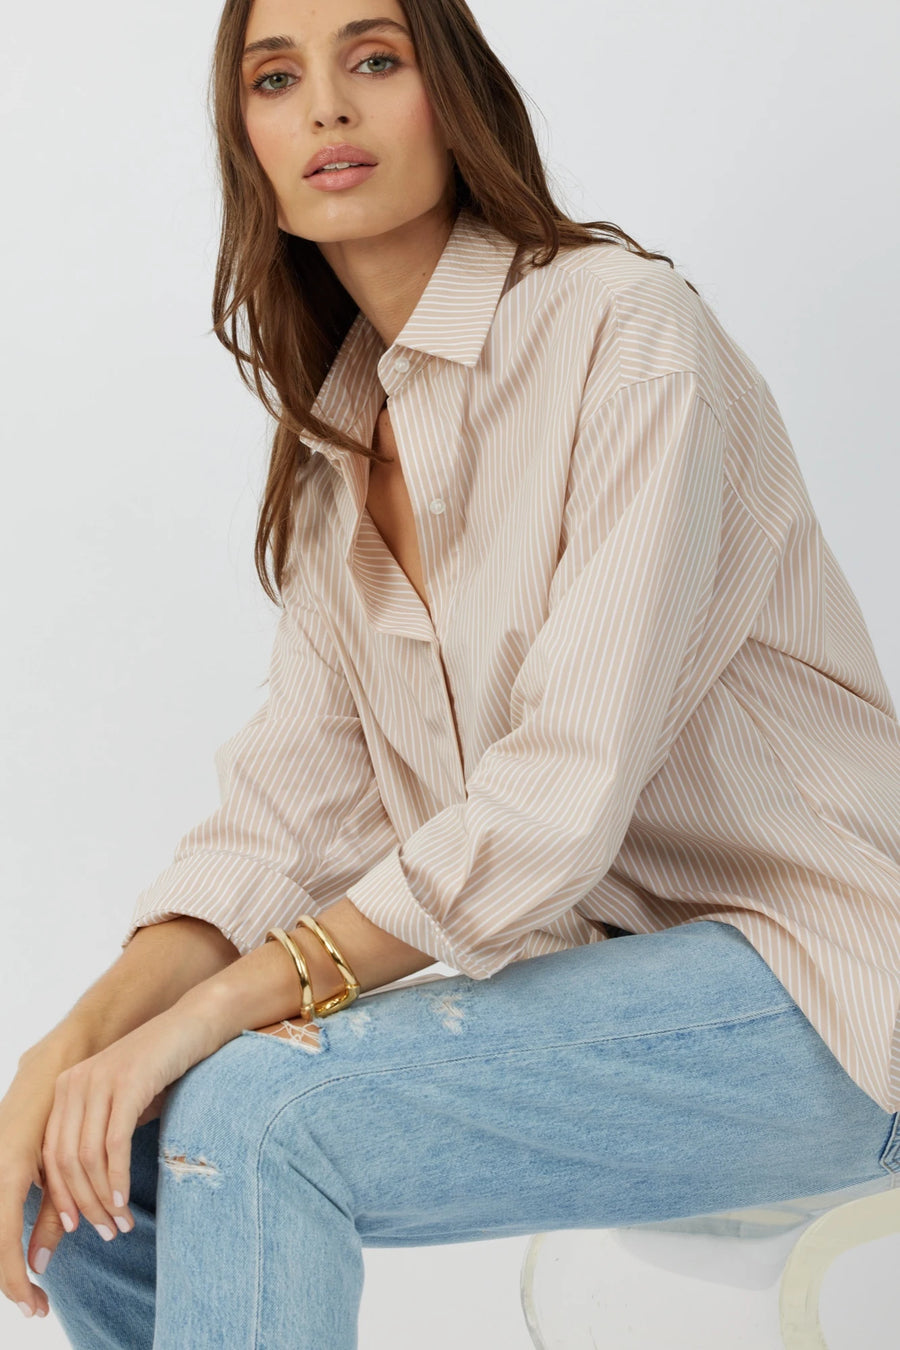 The Reya button down shirt in bengal sesame by Greyven